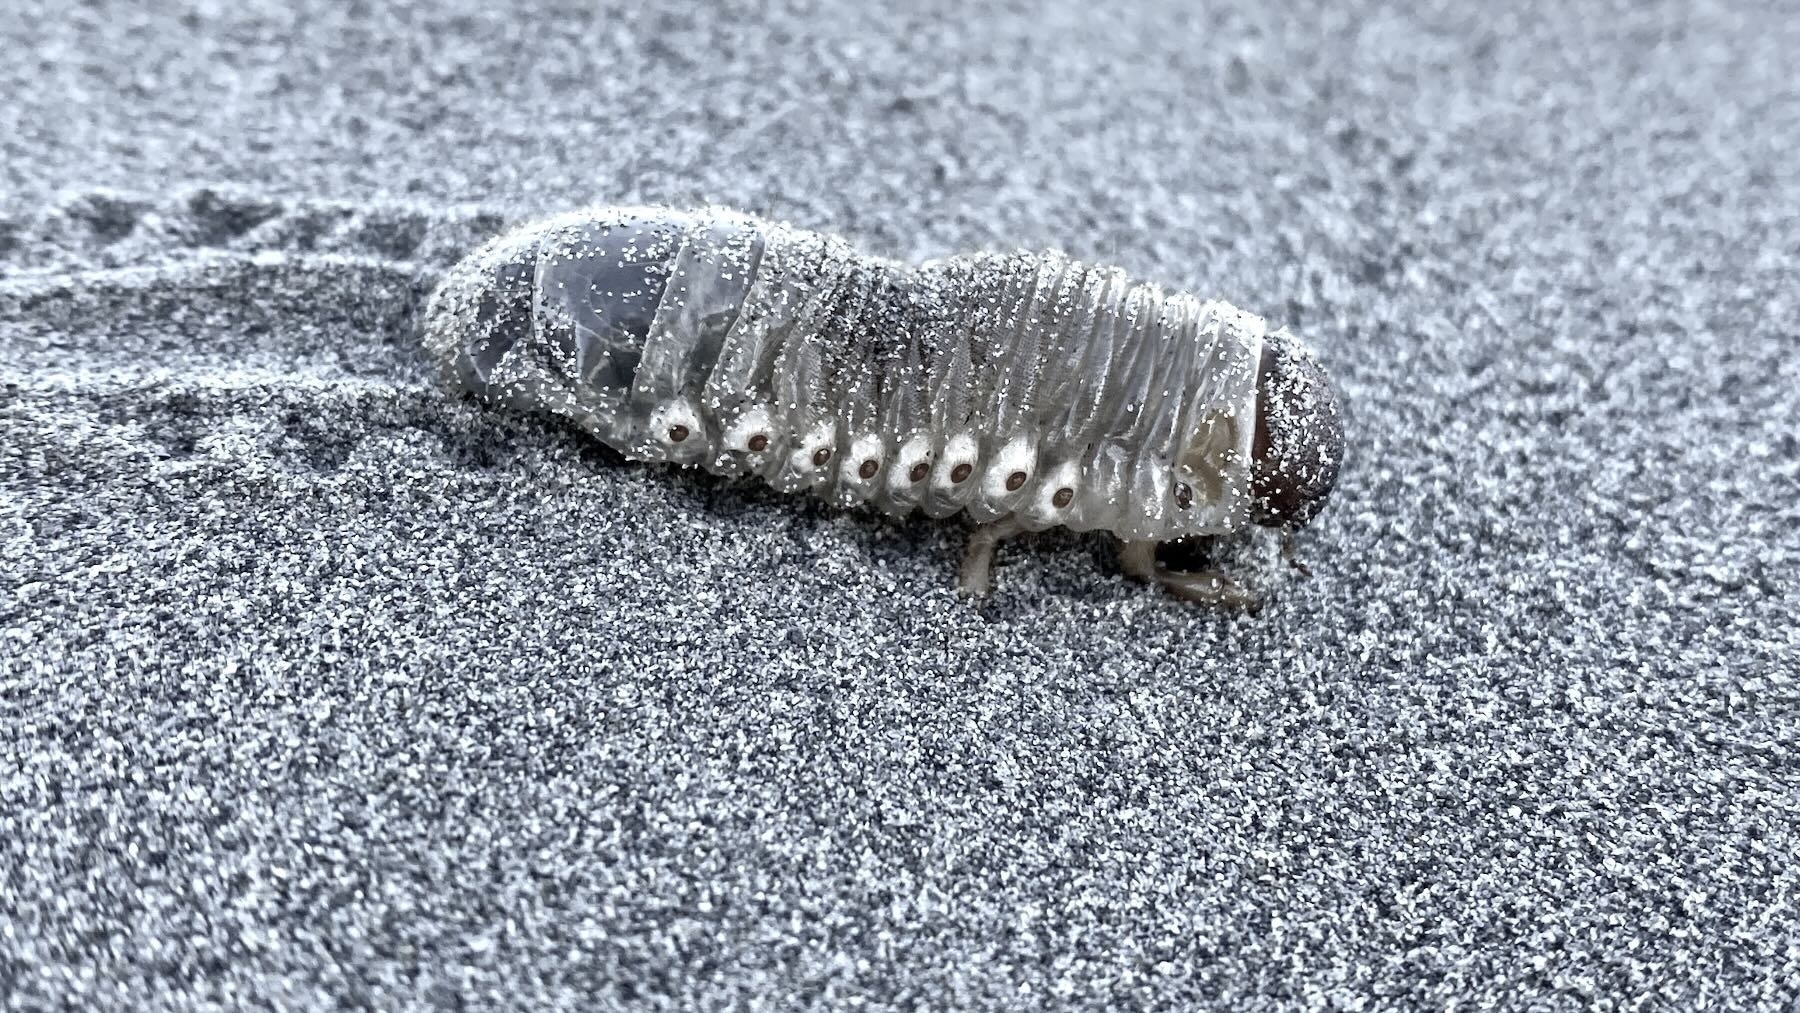 Sand scarab larva with its many legs. 